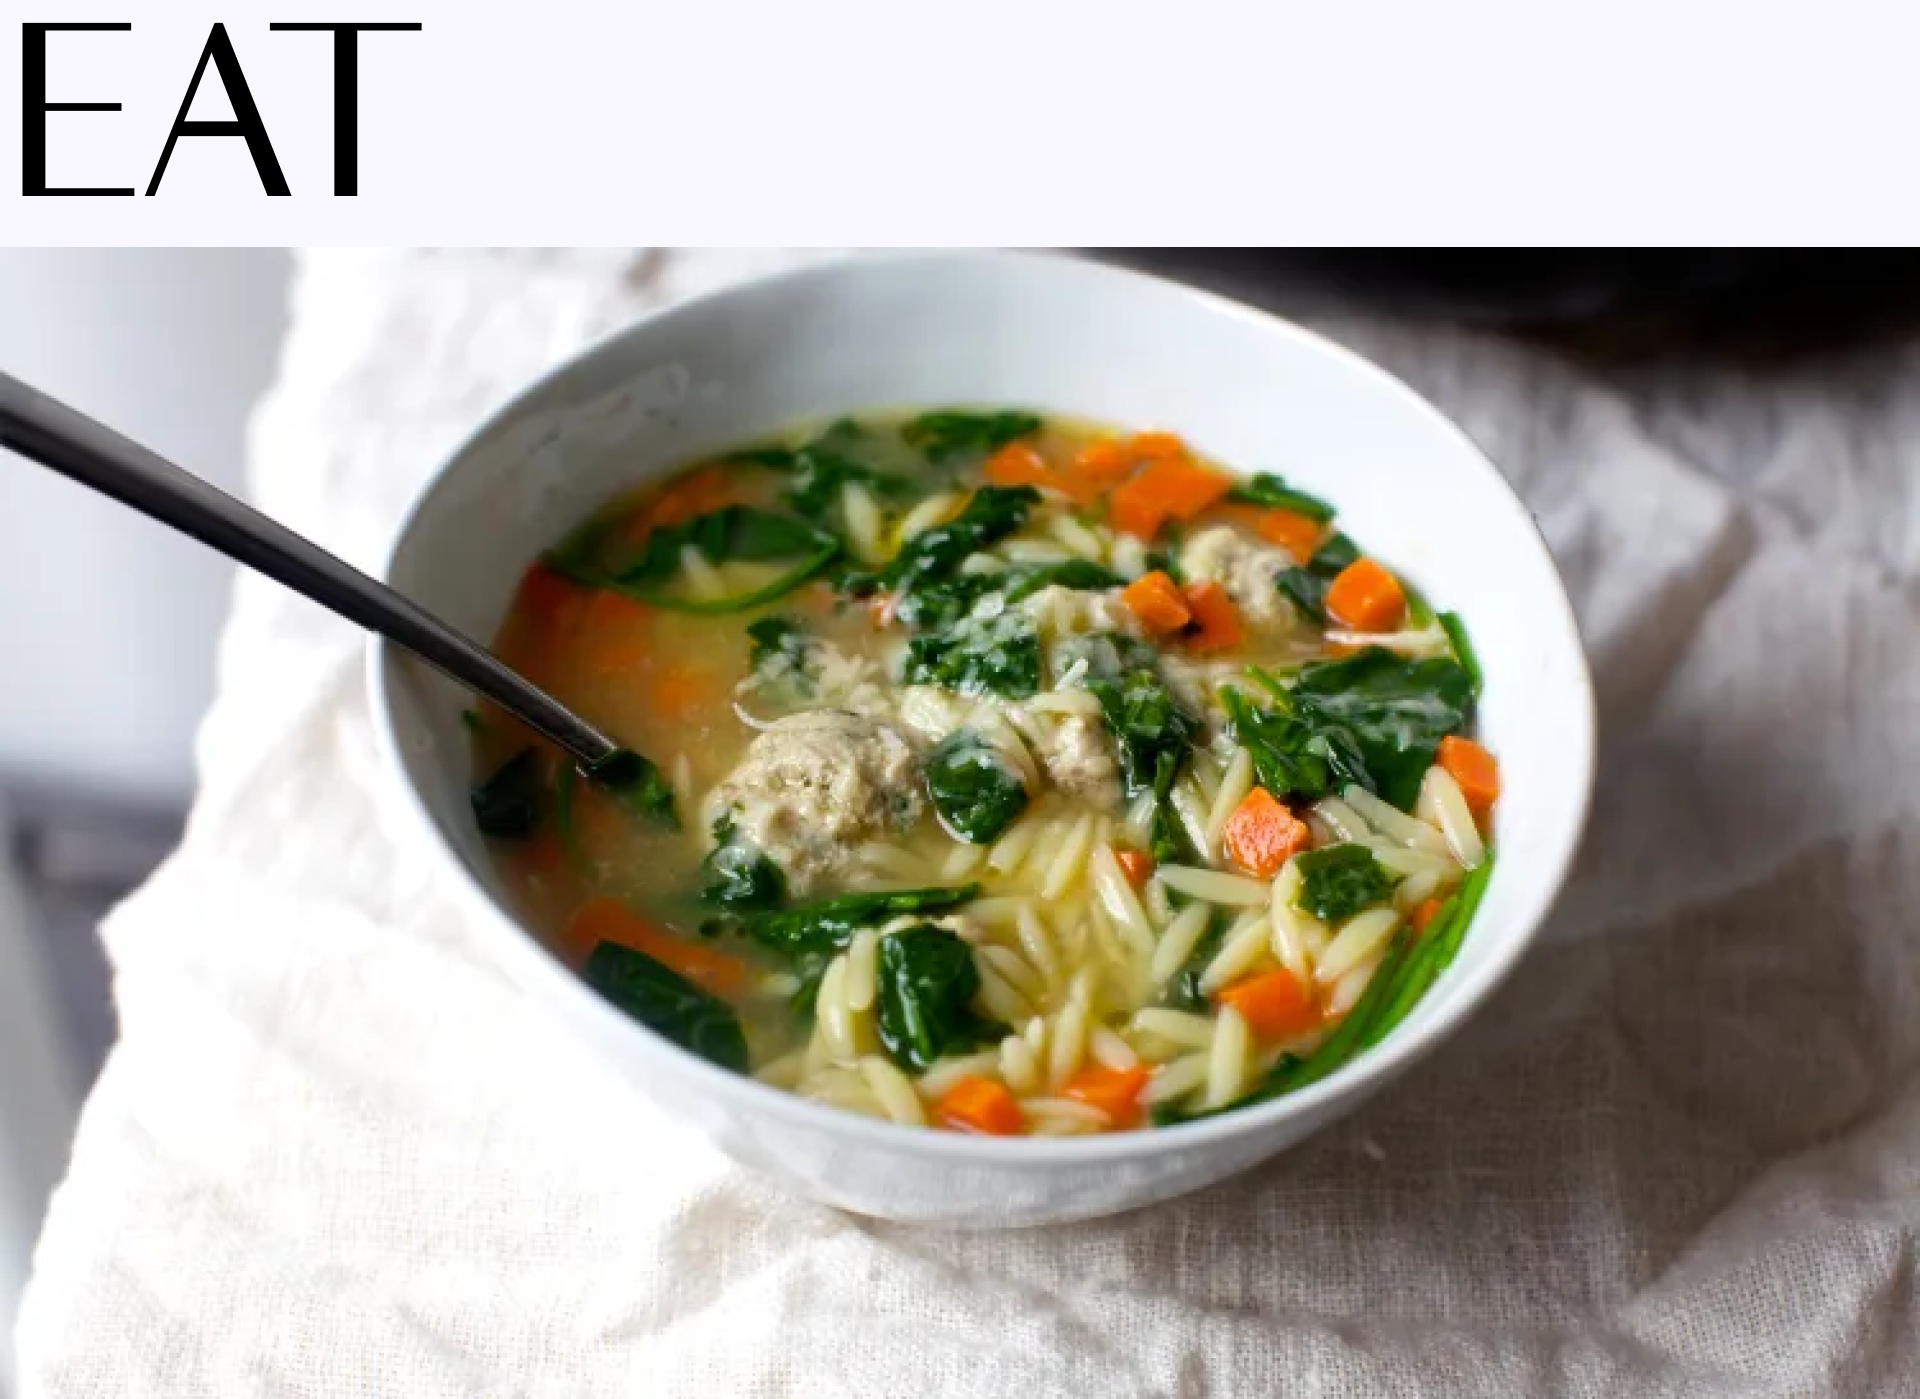 Smitten Kitchen's Greens, Orzo and Meatball Soup